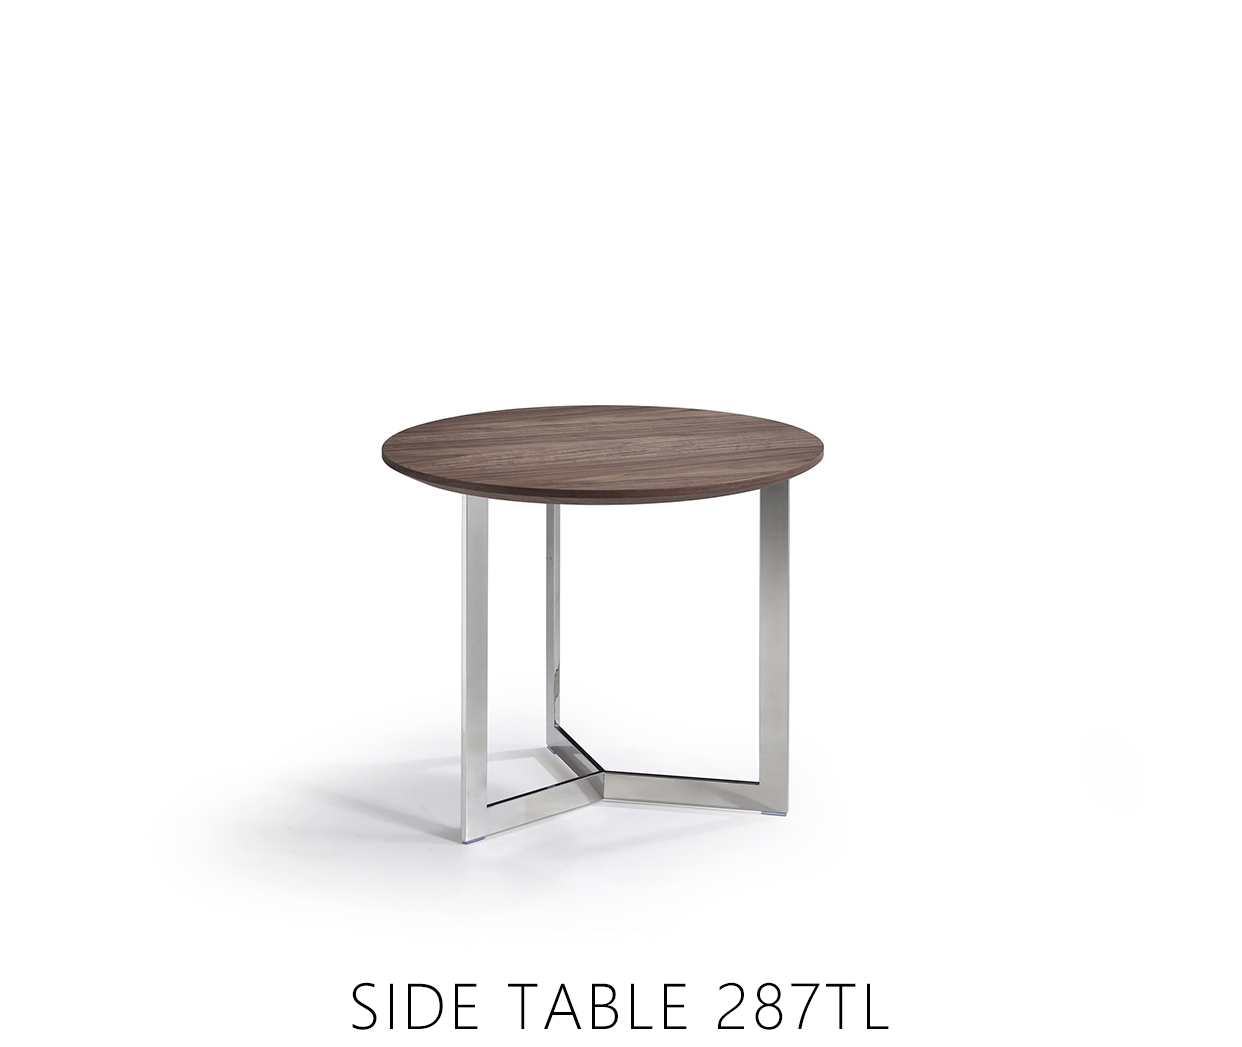 SIDE TABLE 287TL